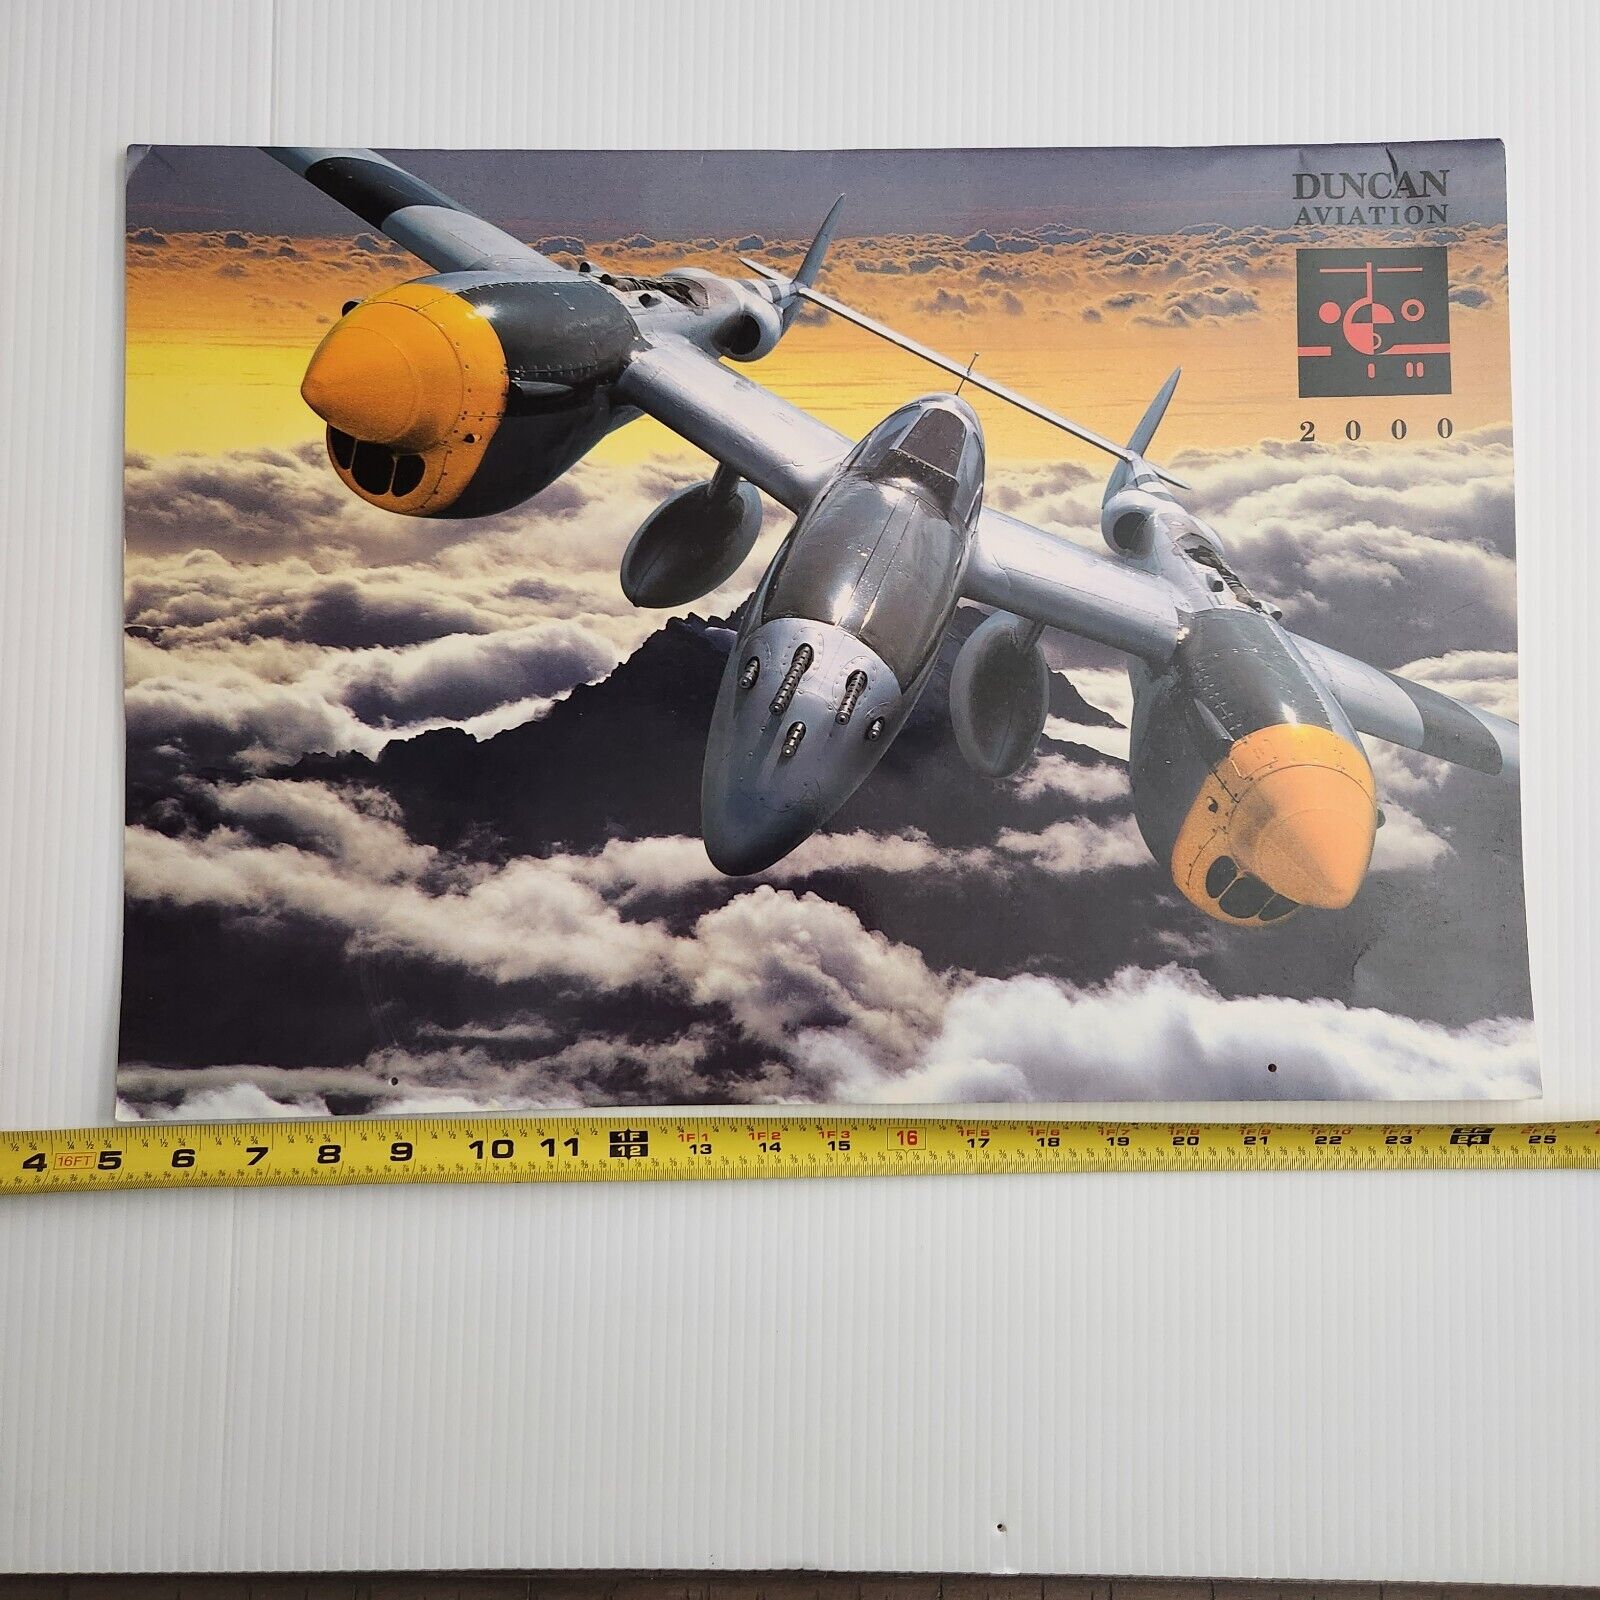 Duncan Aviation Ghosts A Time Remembered Calendar 14 x 20 Aviation 2000